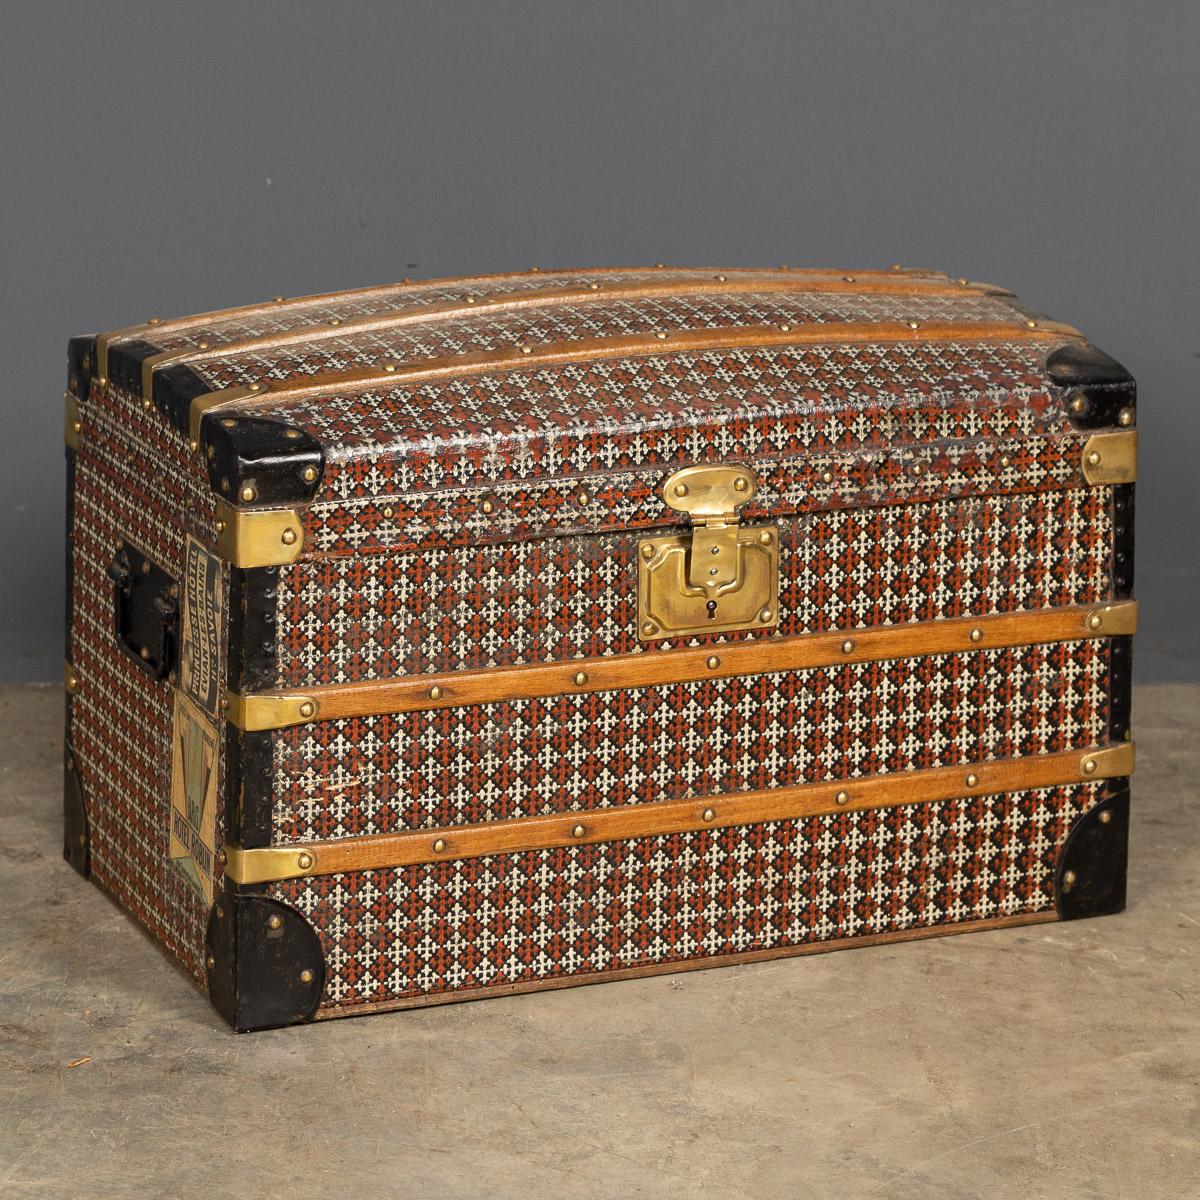 Antique early-20th Century steel bound travelling trunk for a child with wooden slats and a stencilled paper covering with original lock. Inside are the original trays and stencilled lining.

Condition
In Good Condition - Wear As